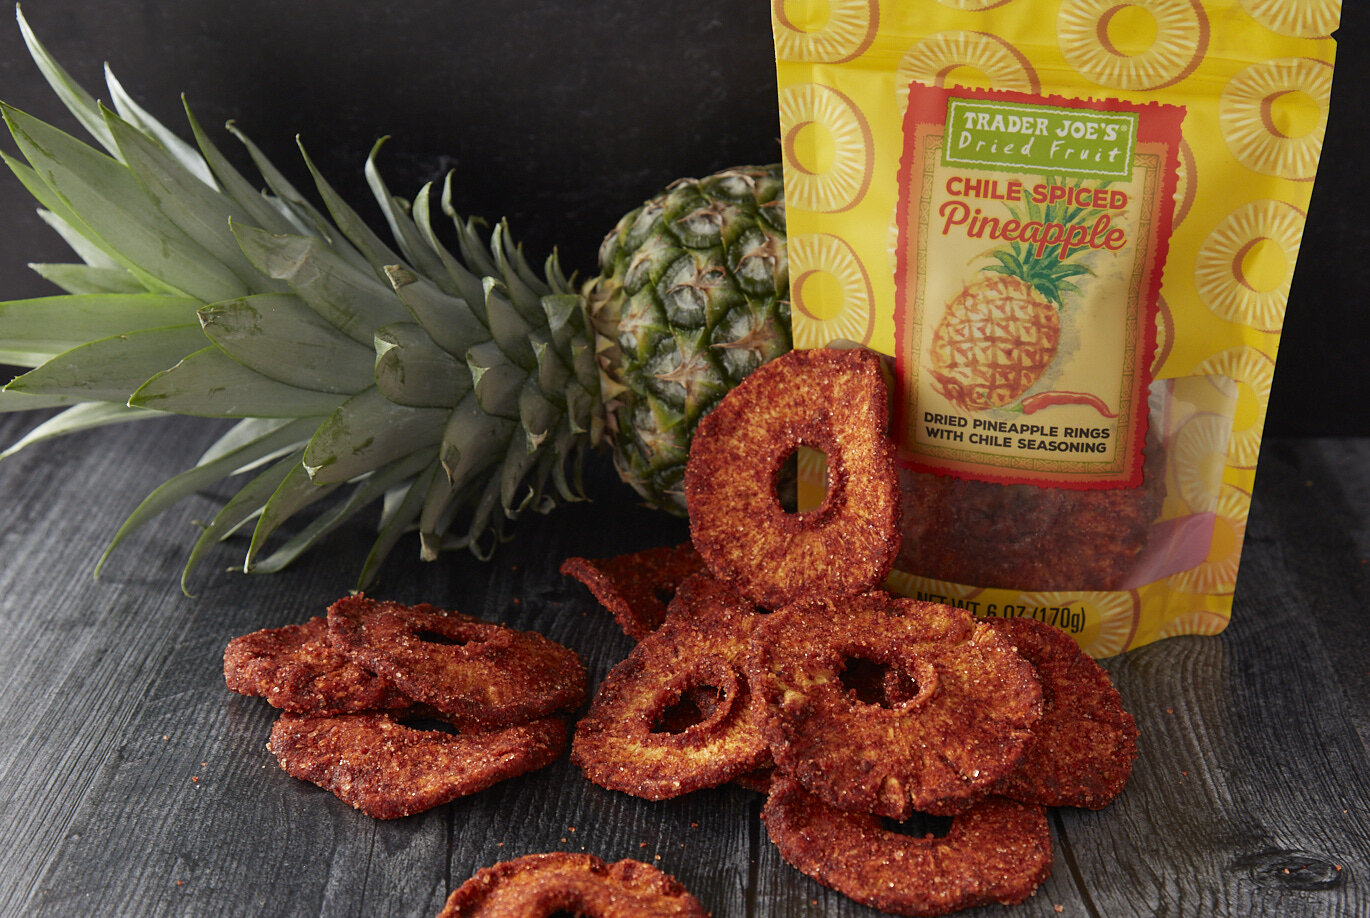 TJ's Chile Spiced Pineapple pieces on a dark surface, a whole pineapple in the background